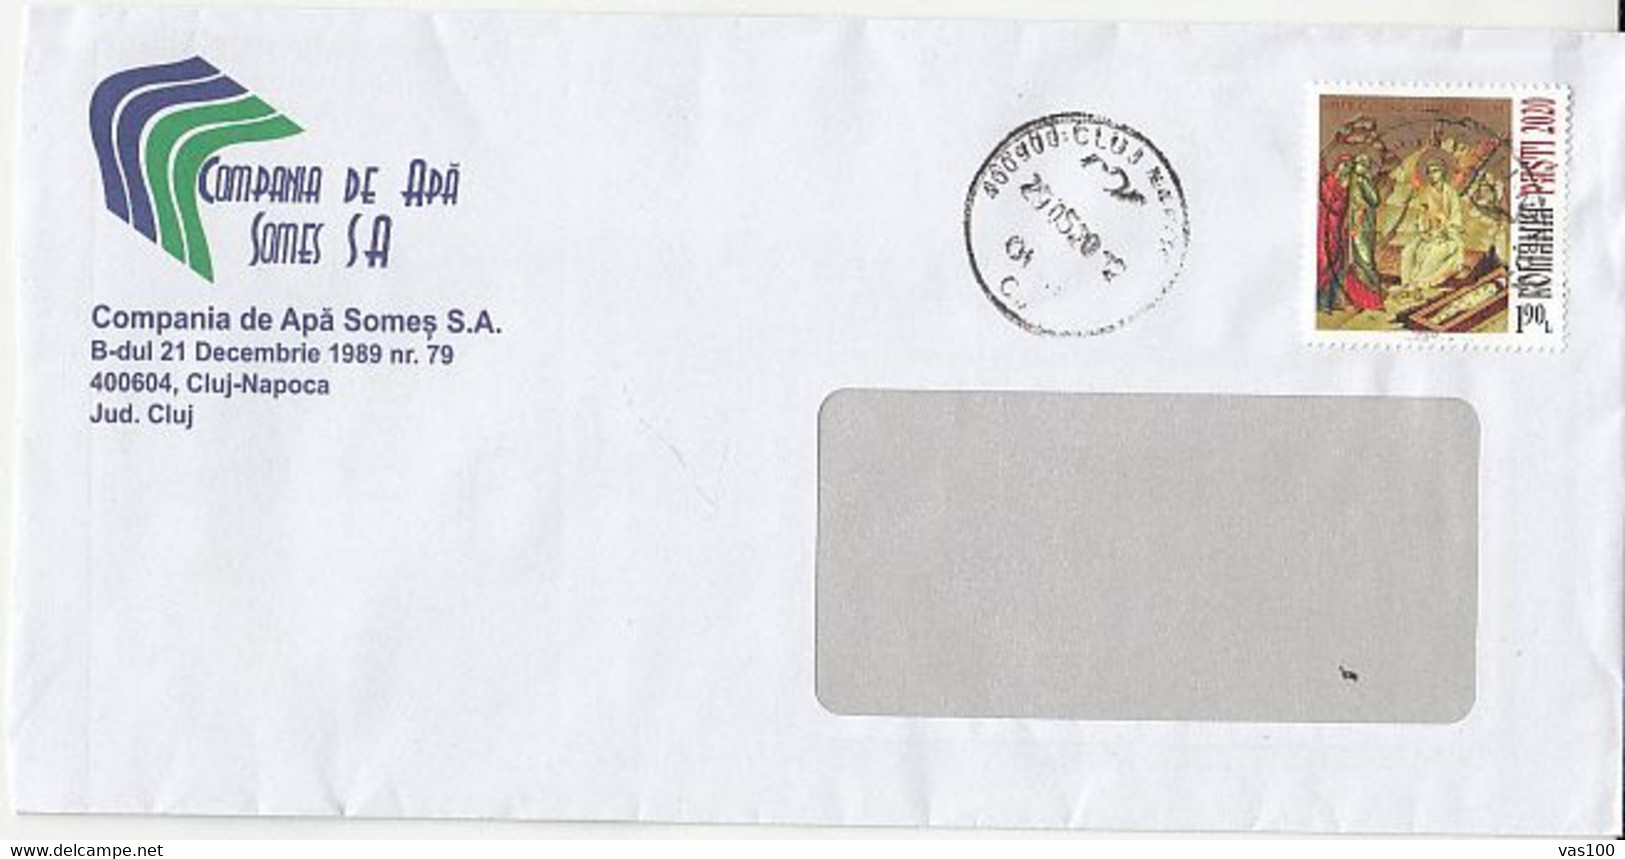 EASTER ICON, STAMP ON COVER, 2020, ROMANIA - Briefe U. Dokumente